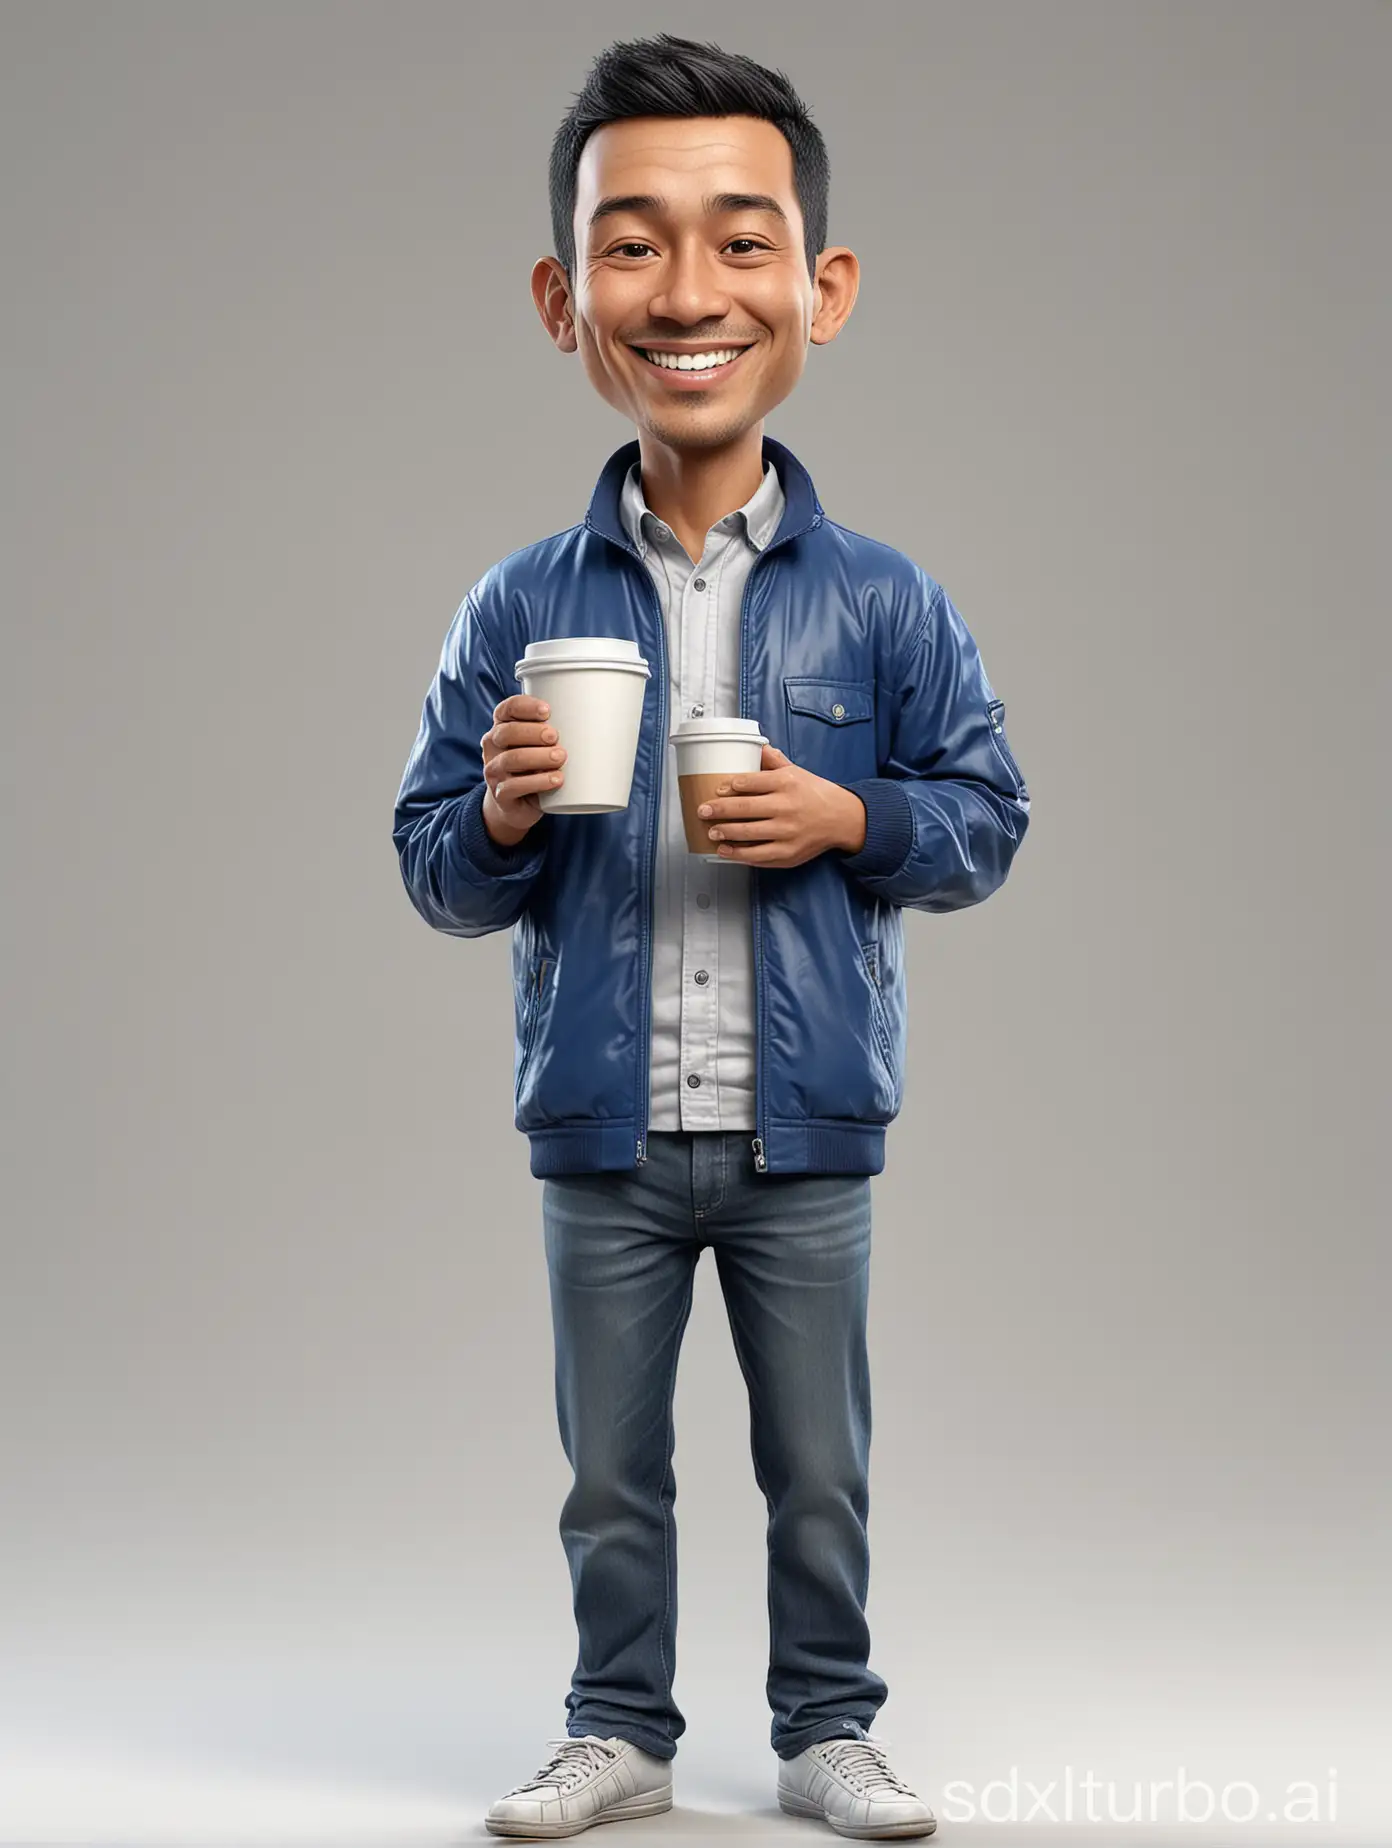 Full body, Caricature of Indonesian man, medium body size, thin hair, smiling expression, standing, holding a cup filled with coffee, wearing a blue sport jacket, white background. Big head size. Realistic. 3D. HD